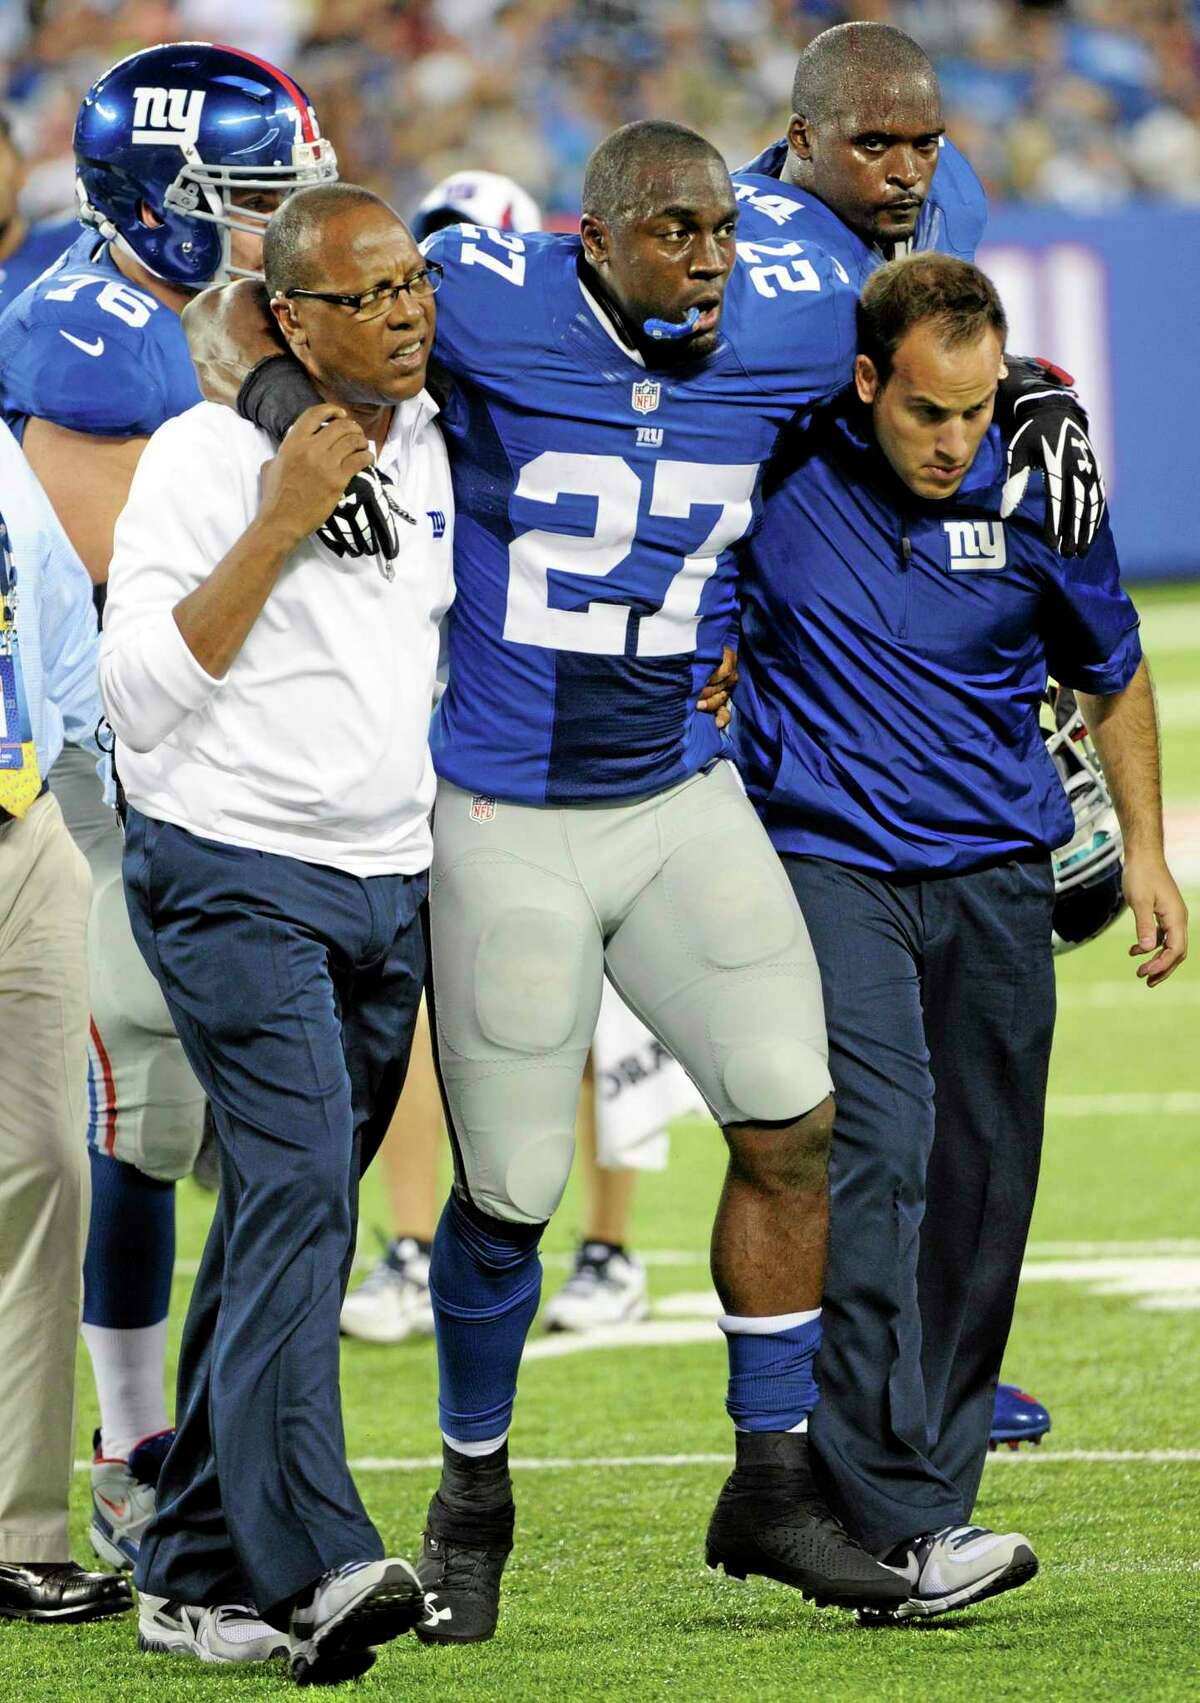 Trainers carry New York Giants safety Stevie Brown off the field after he was injured on a play during the first half of a preseason game against the New York Jets on Saturday in East Rutherford, N.J.